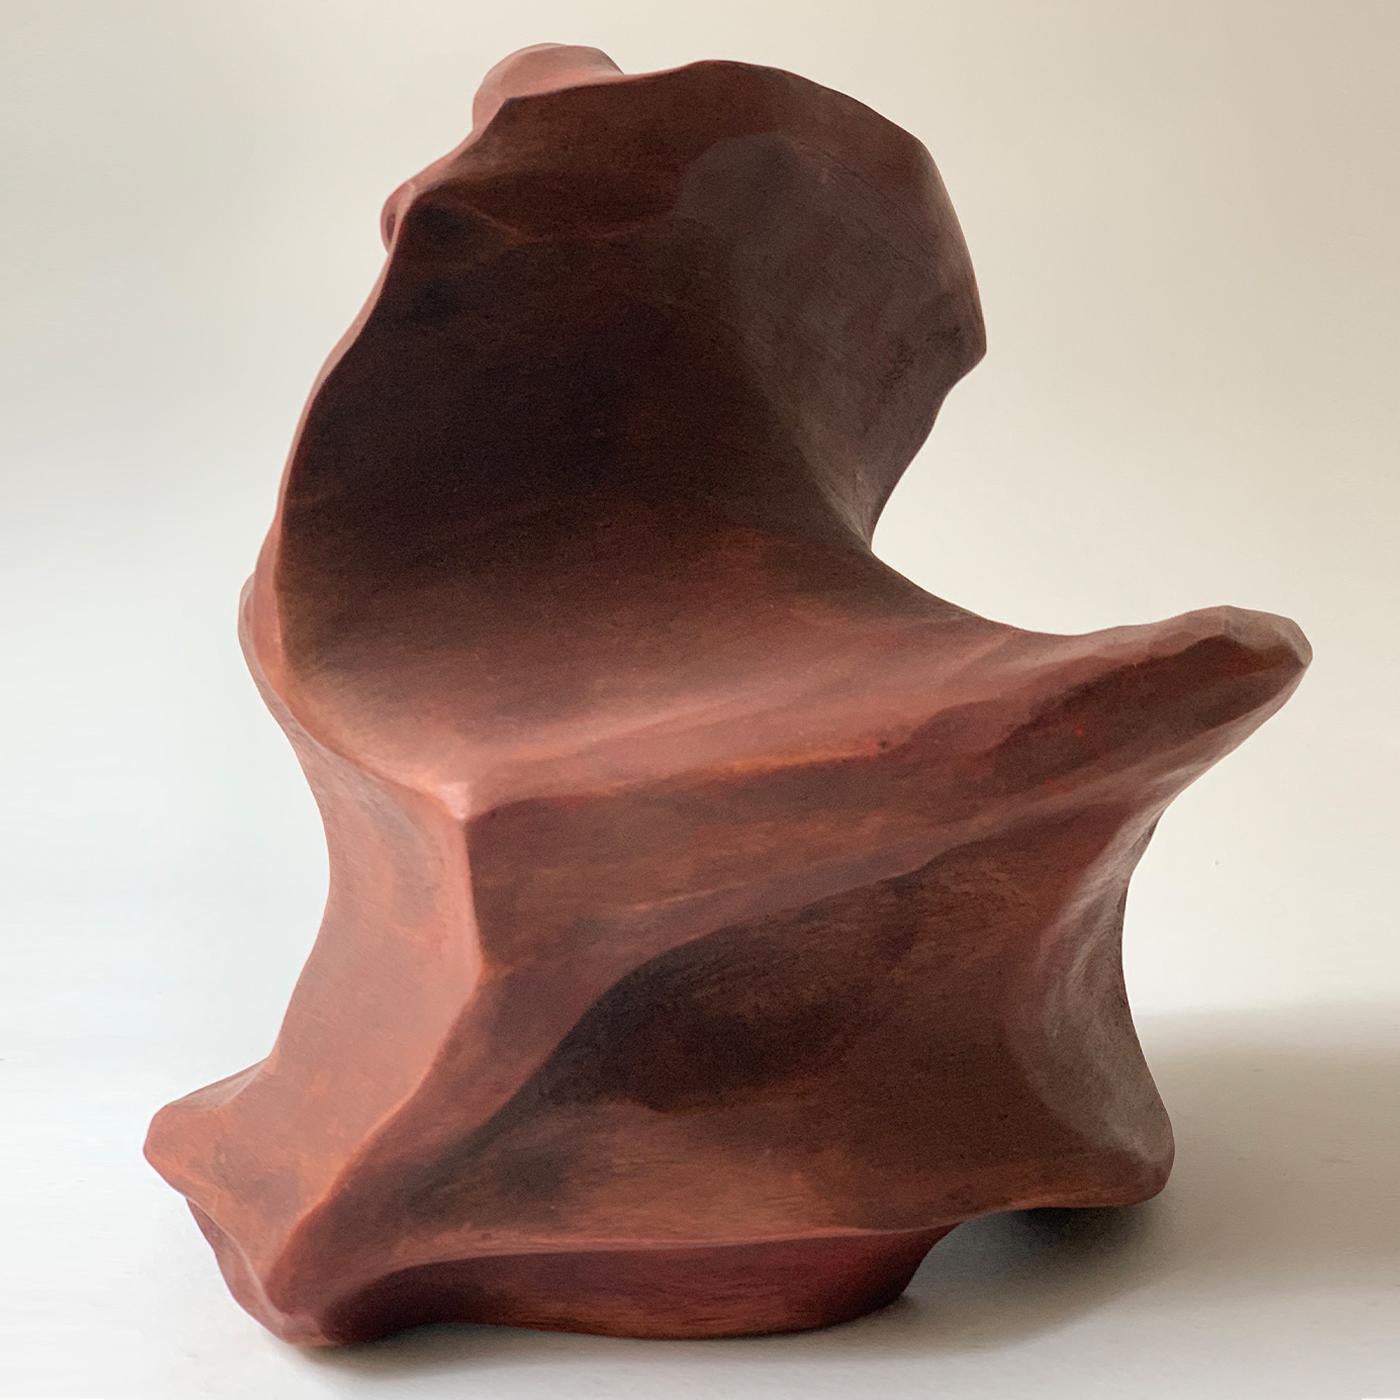 Part of a spectacular series of sculptures coated with pure red pigment resulting in an intense, incandescent shade of bold visual impact, this magnificent sculpture is defined by a harmonious and dynamic combination of full and empty curves. It can